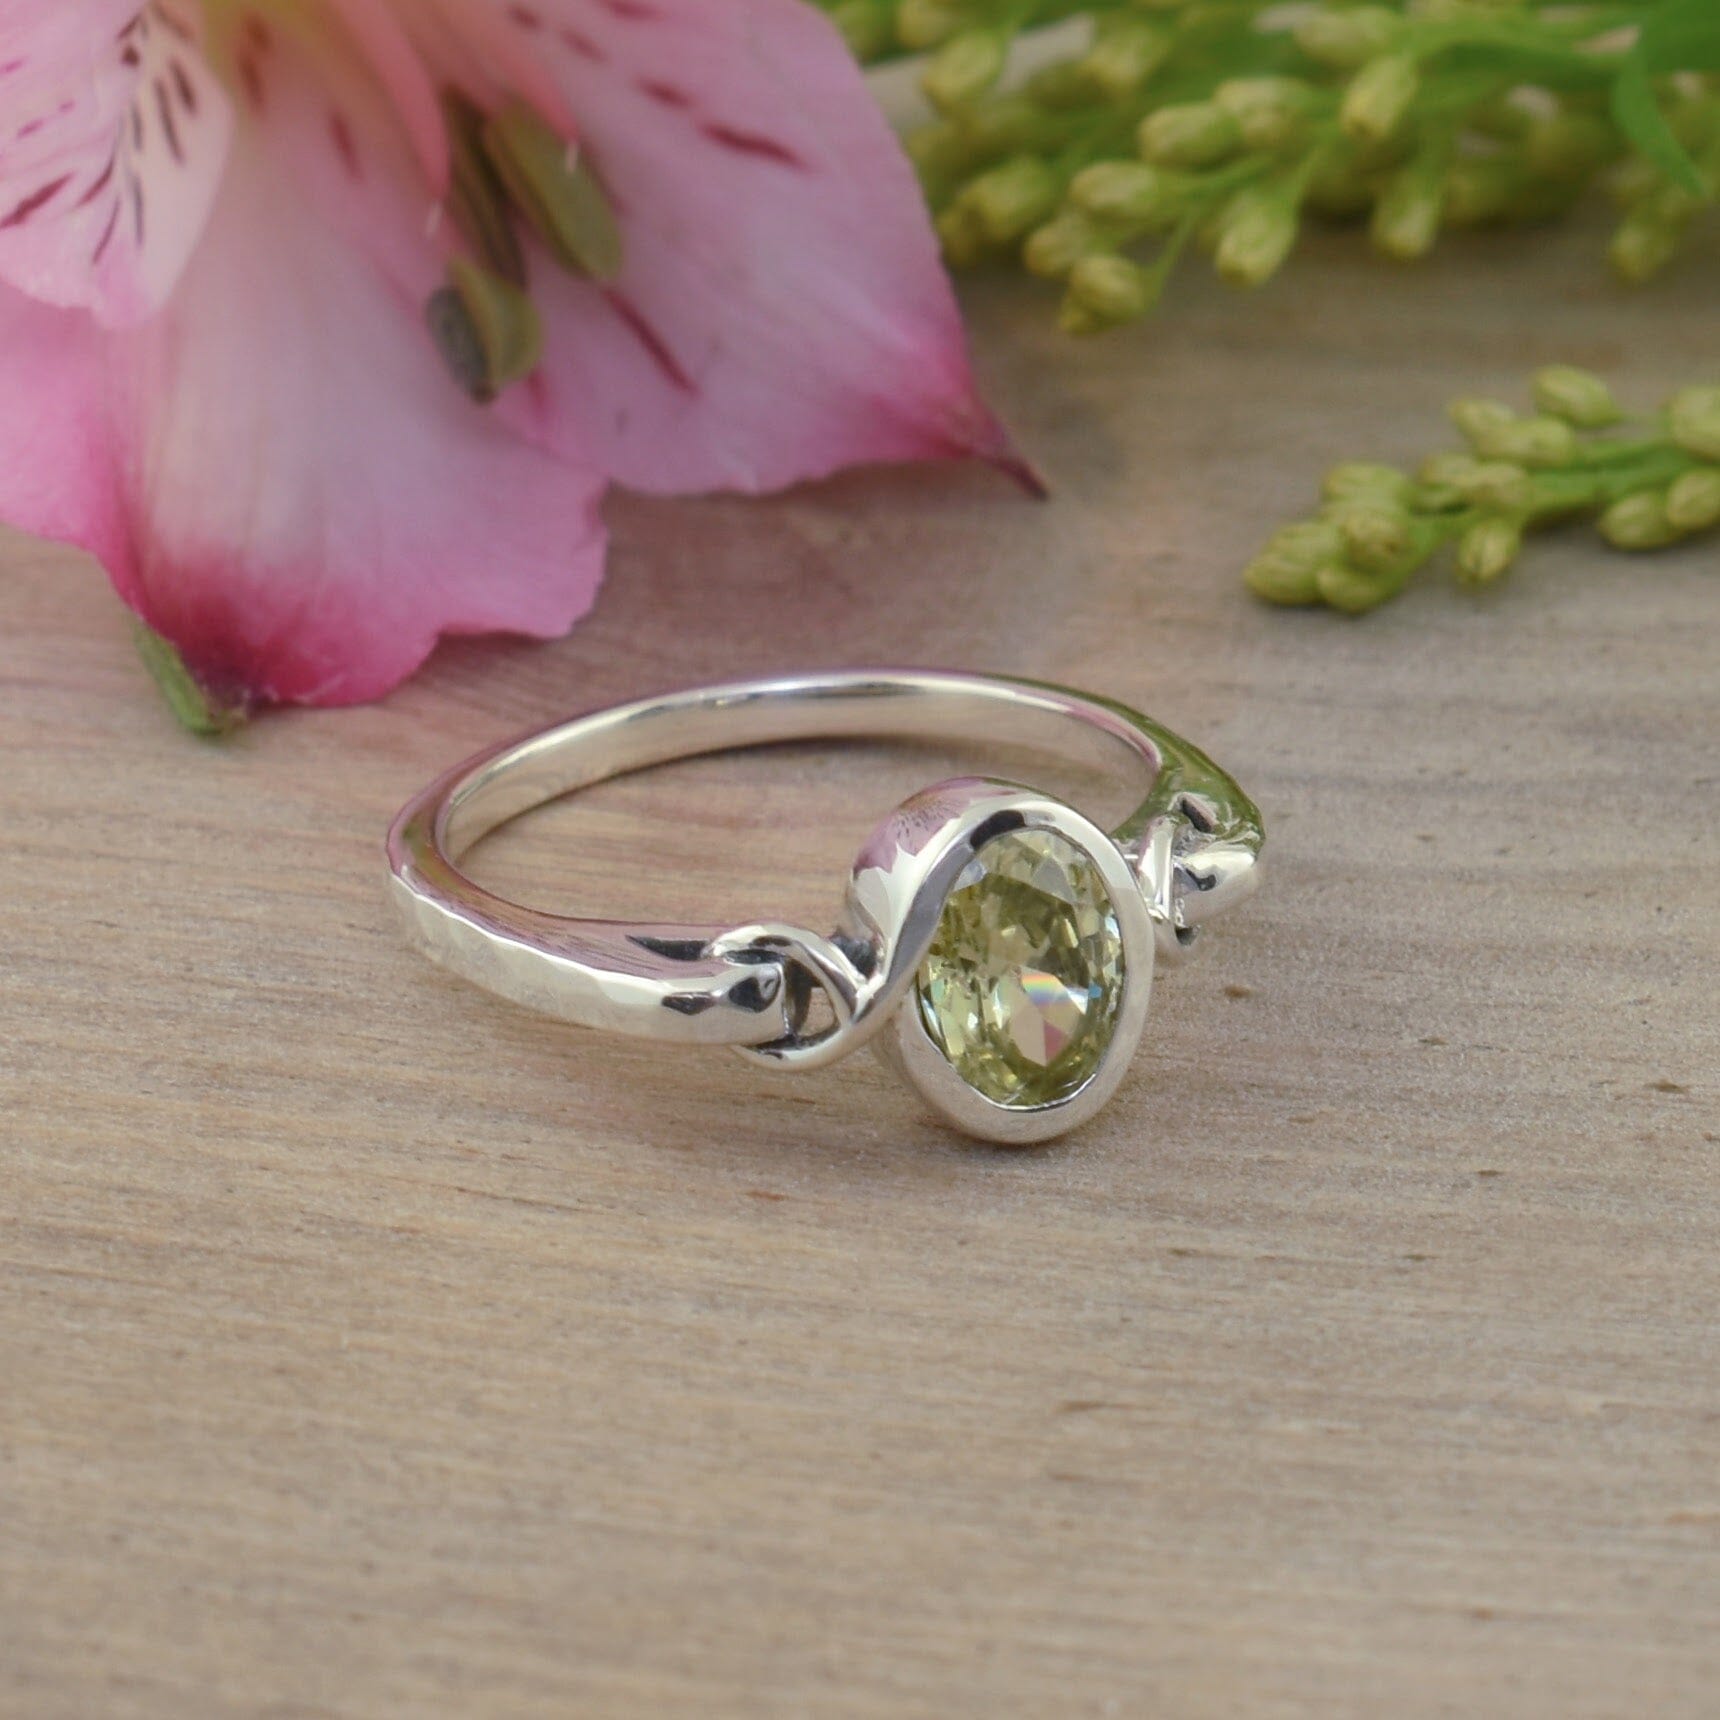 dainty sterling silver featuring an oval peridot cz